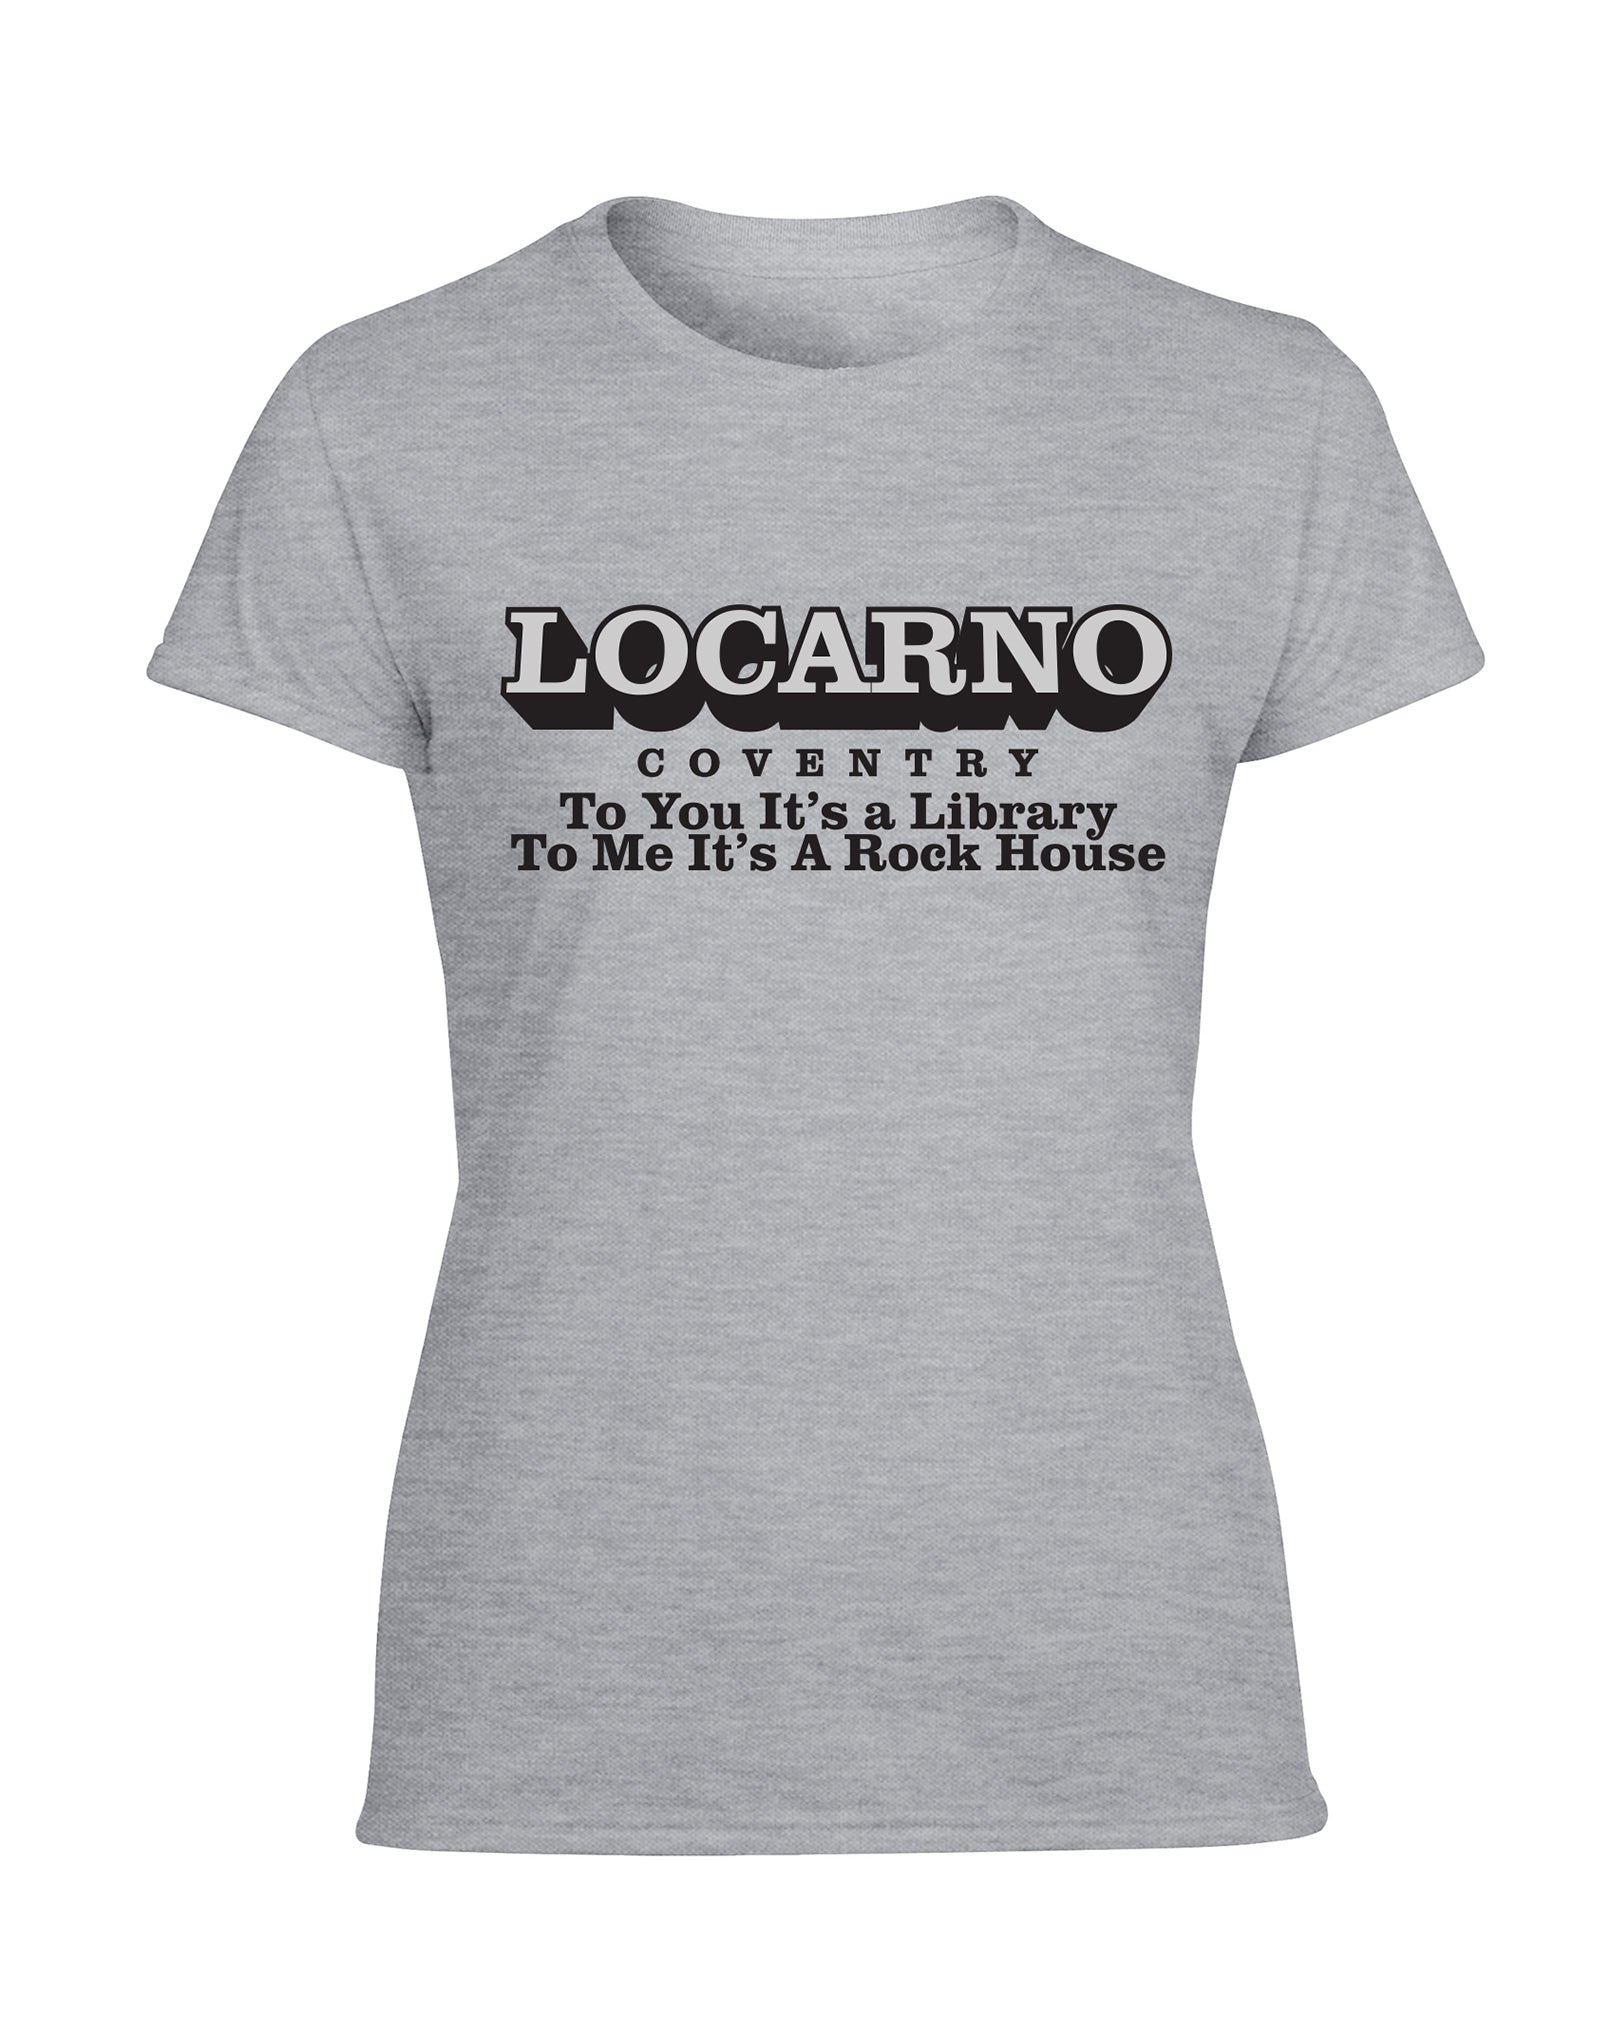 Locarno/Rockhouse - Coventry - ladies fit t-shirt- various colours - Dirty Stop Outs